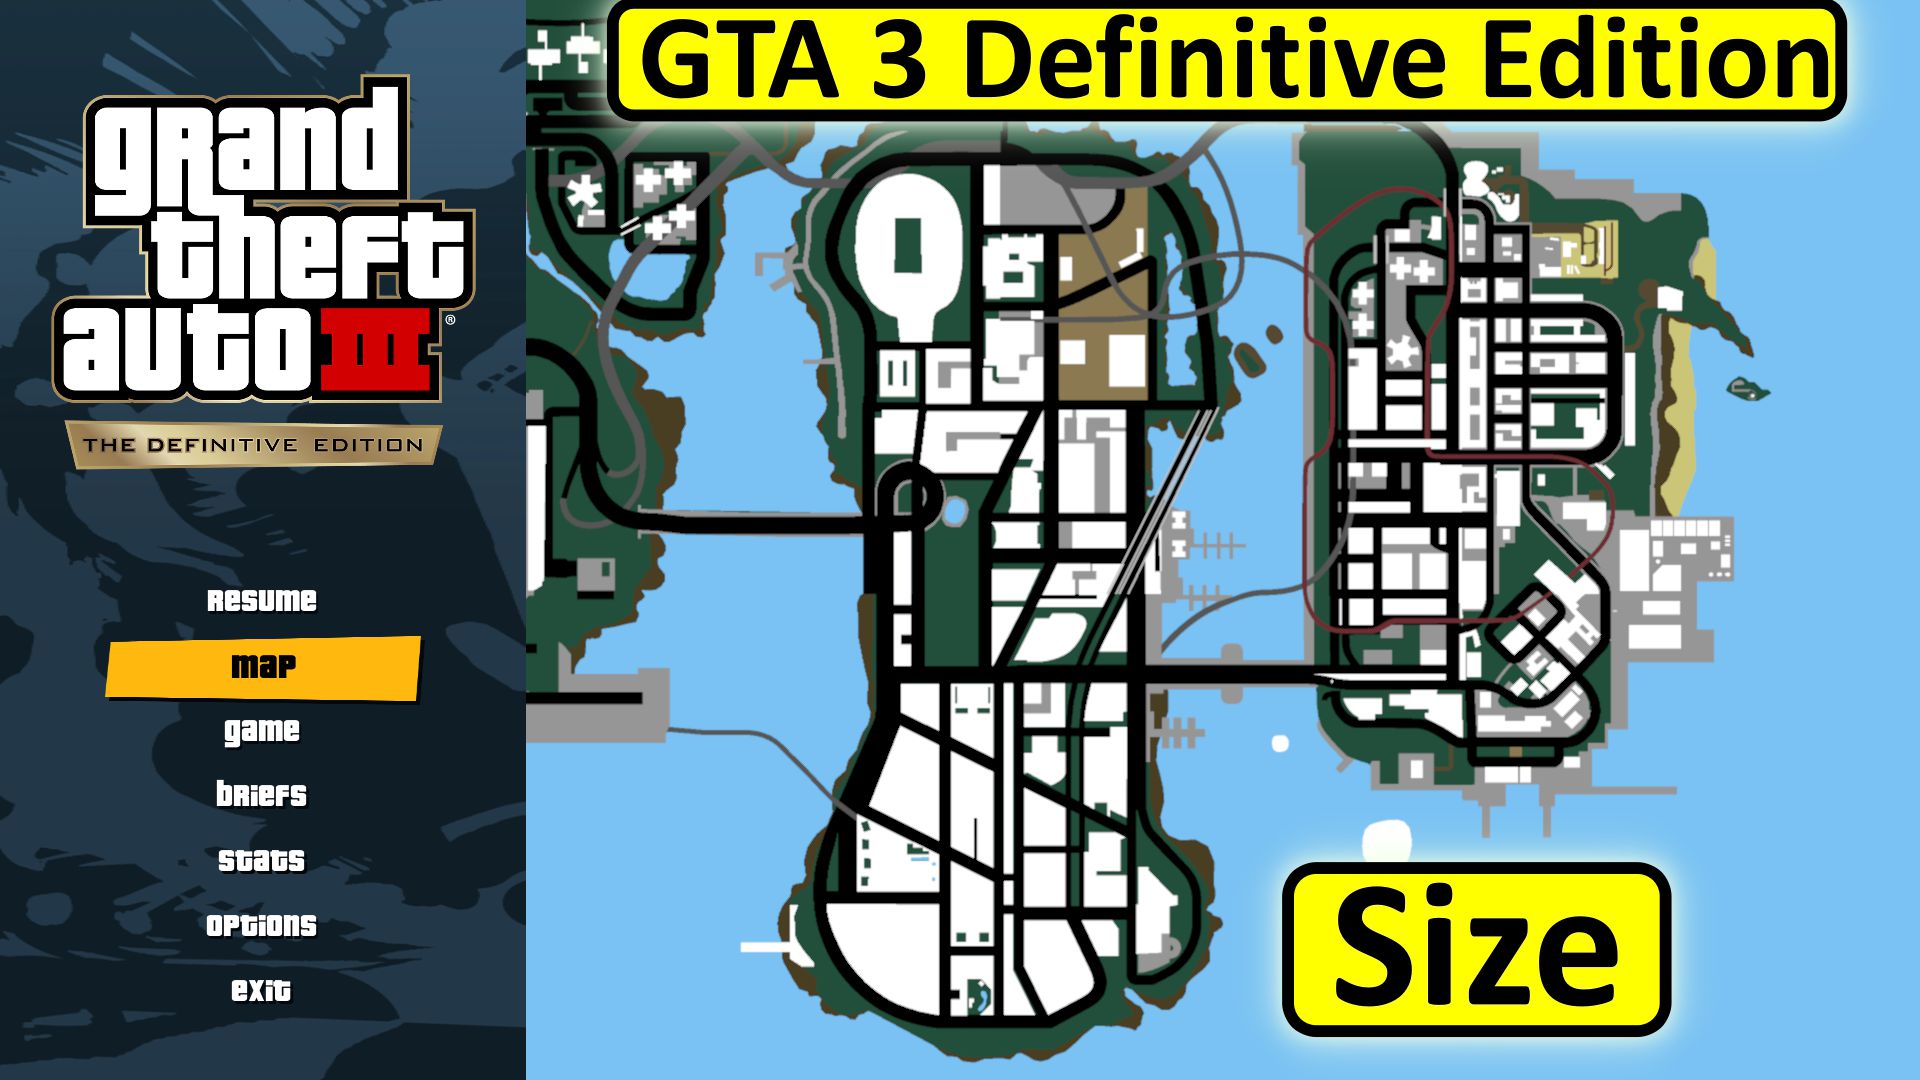 GTA 3 definitive edition size - For PC, Xbox, PlayStation, etc